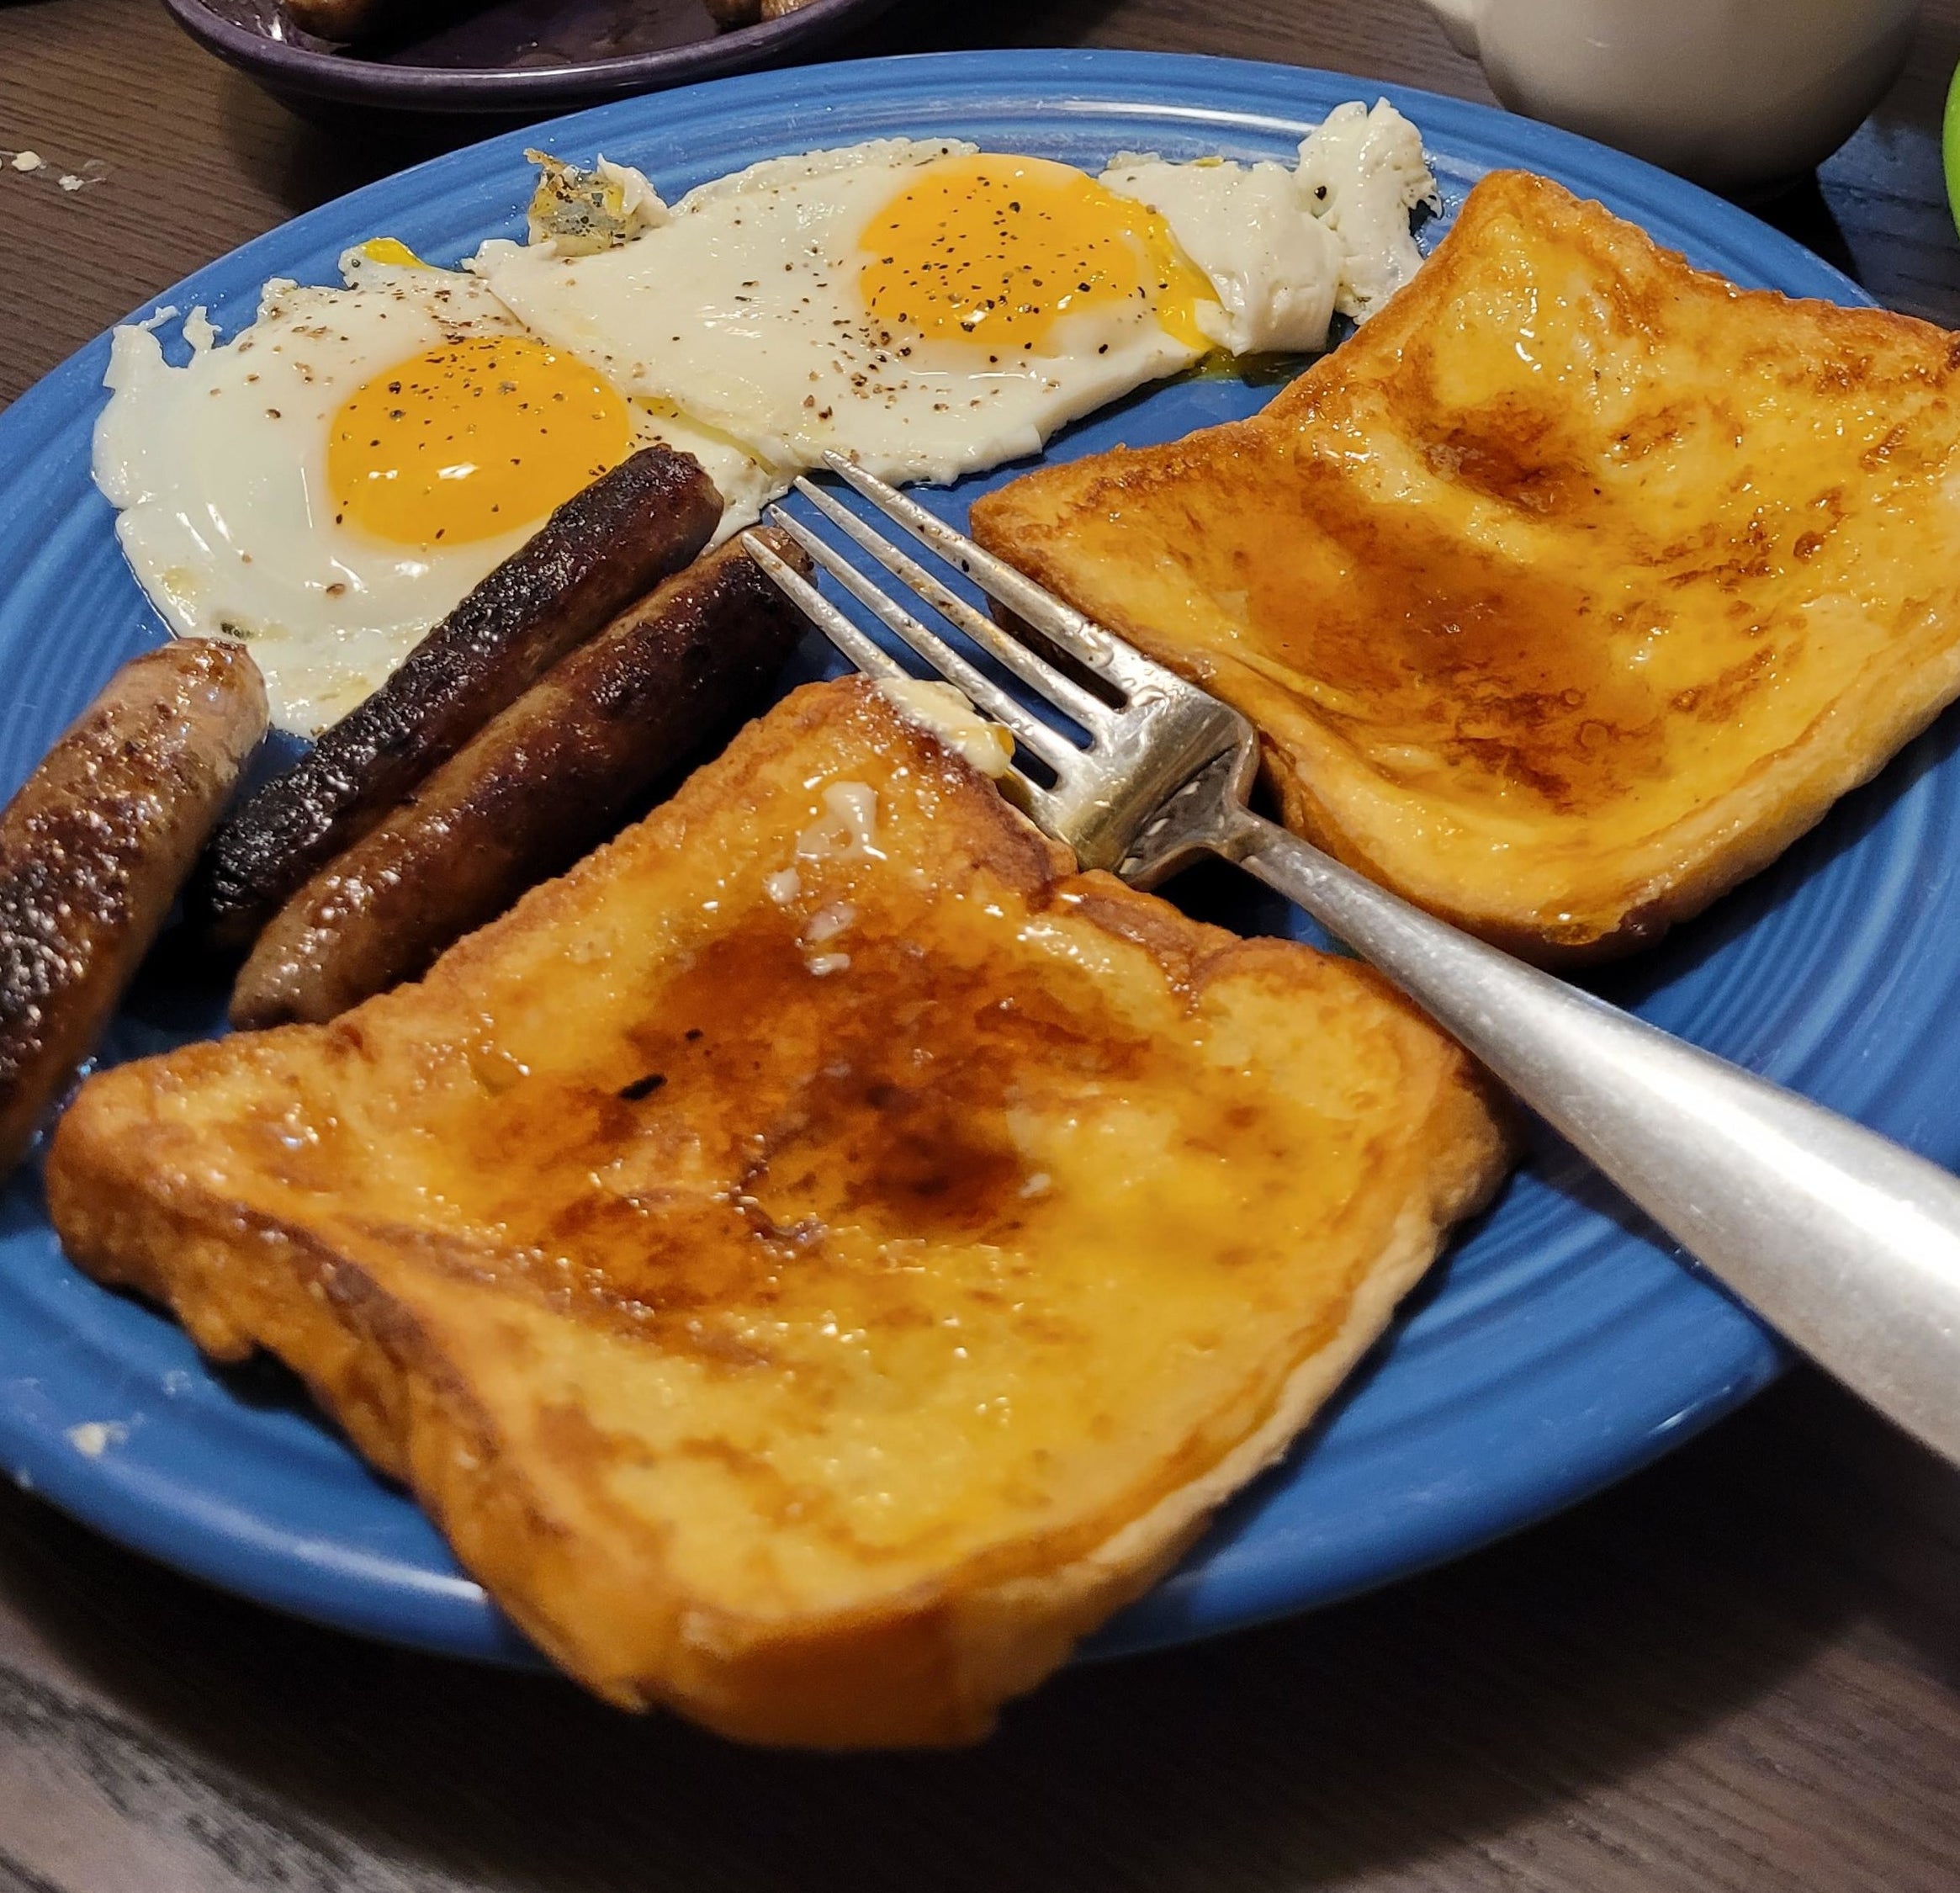 Breakfast for dinner with eggs, French toast, and sausage